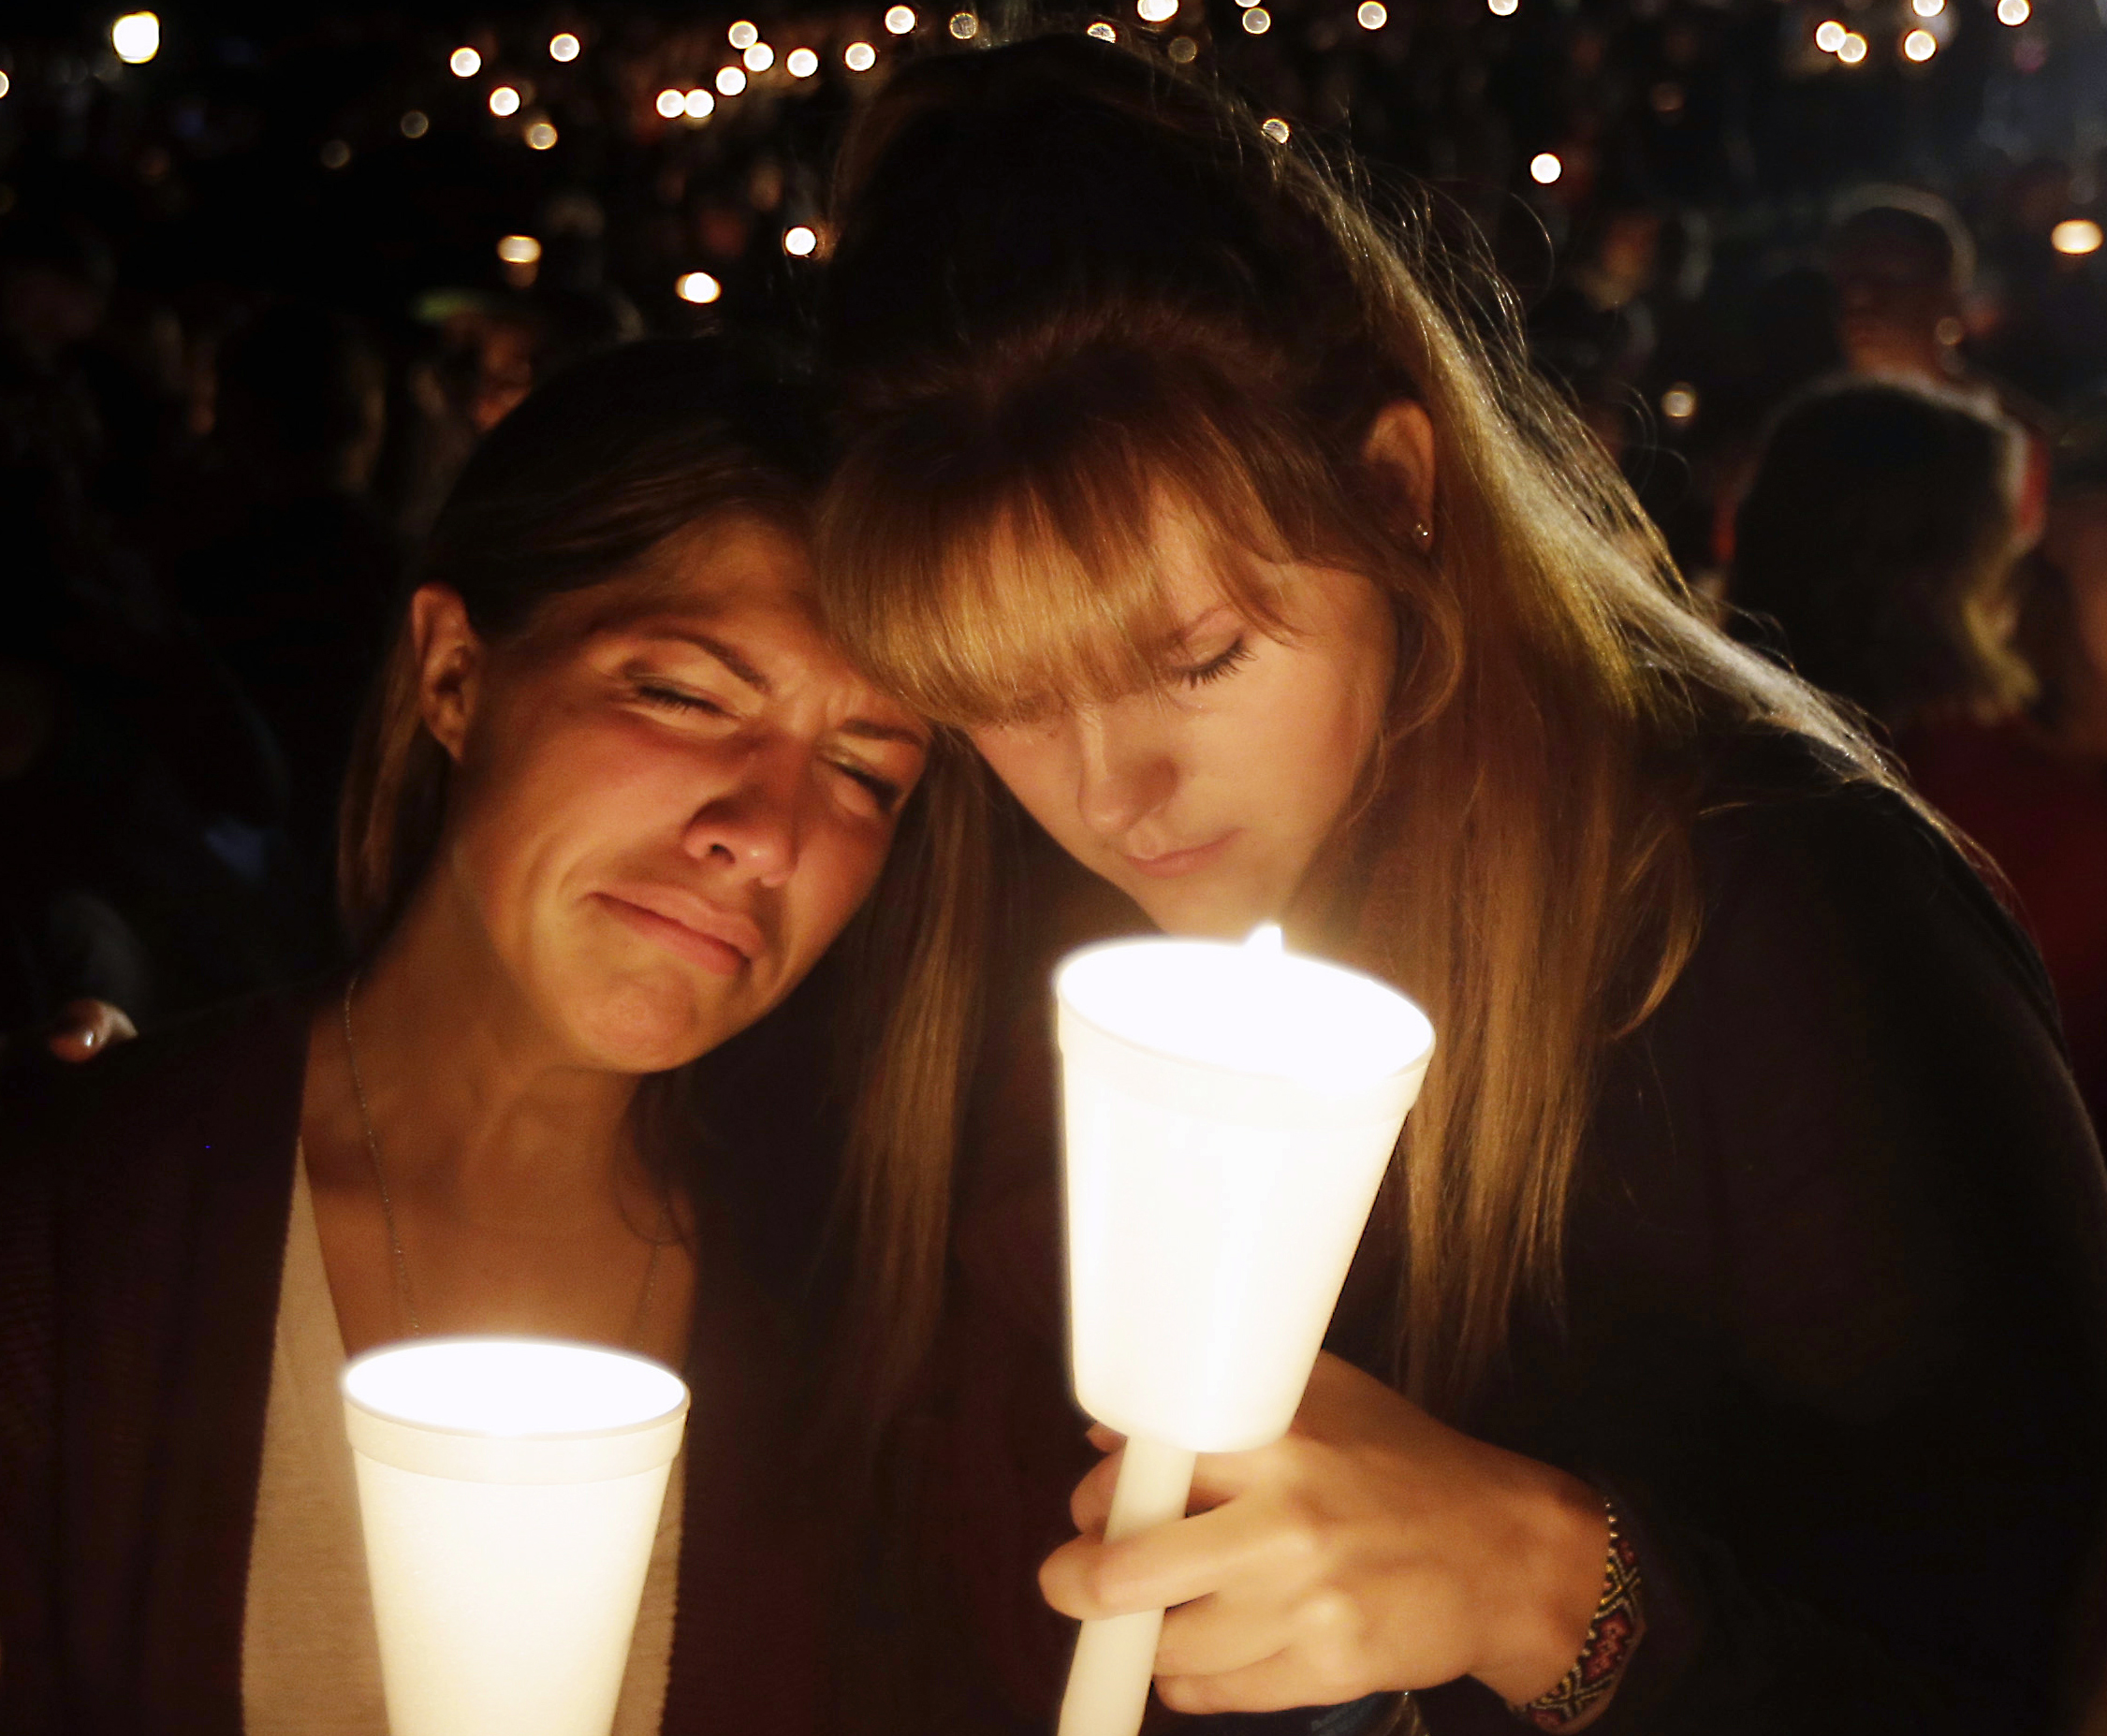 PHOTO: Kristen Sterner, left, and Carrissa Welding, both students at Umpqua Community College, embrace each other during a candlelight vigil for those killed during a shooting at the college, Oct. 1, 2015, in Roseburg, Ore.